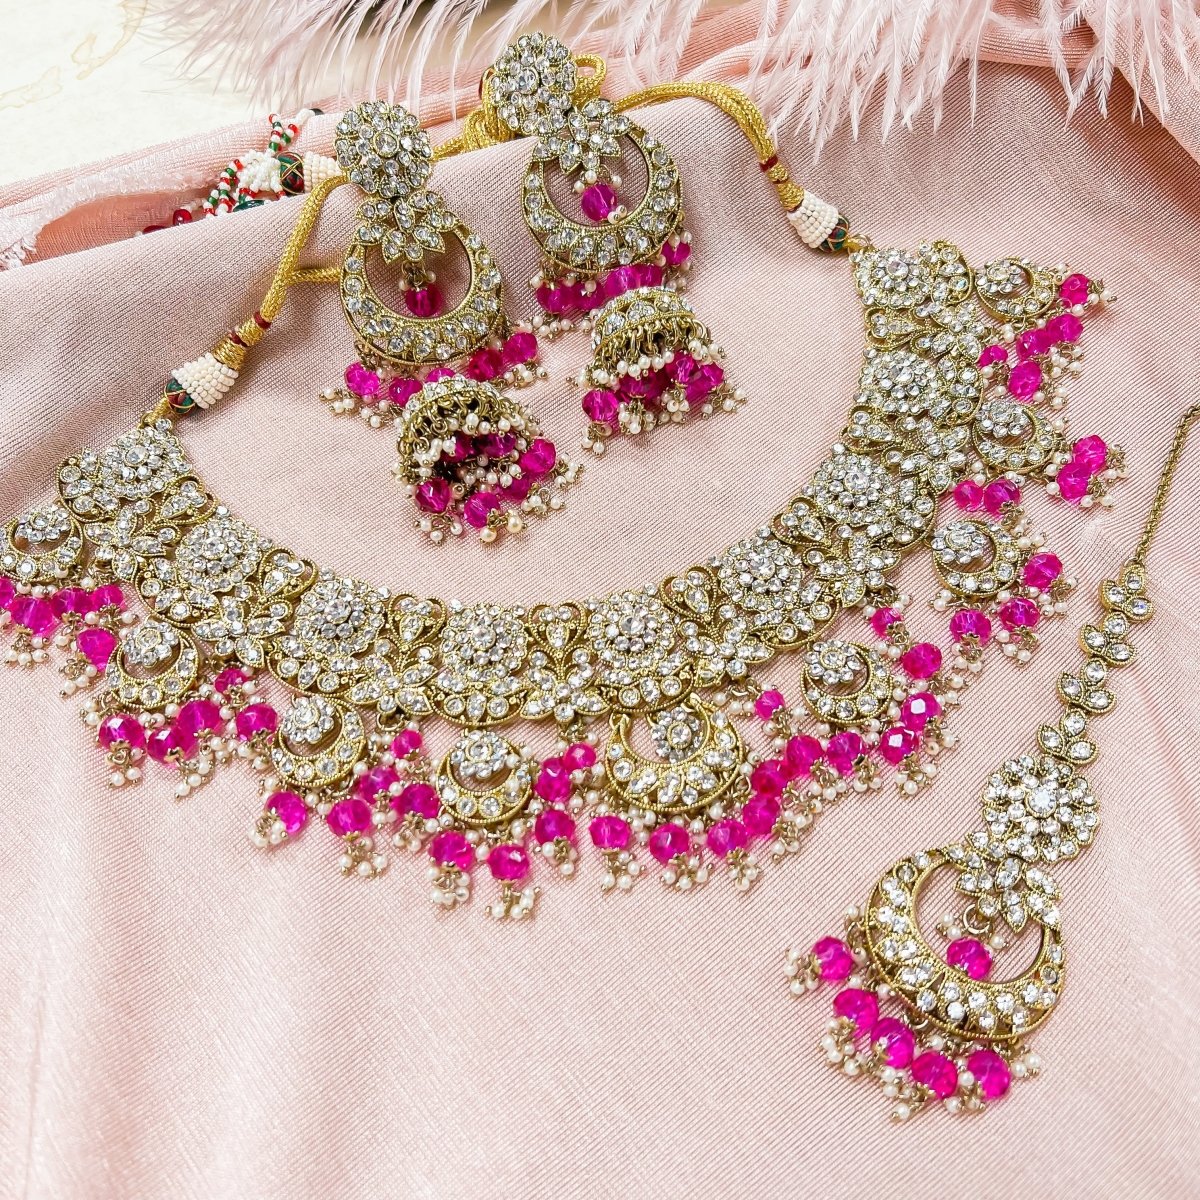 Pink Crystal and Fuchsia Beads Necklace - Garden Party Collection Vintage  Jewelry